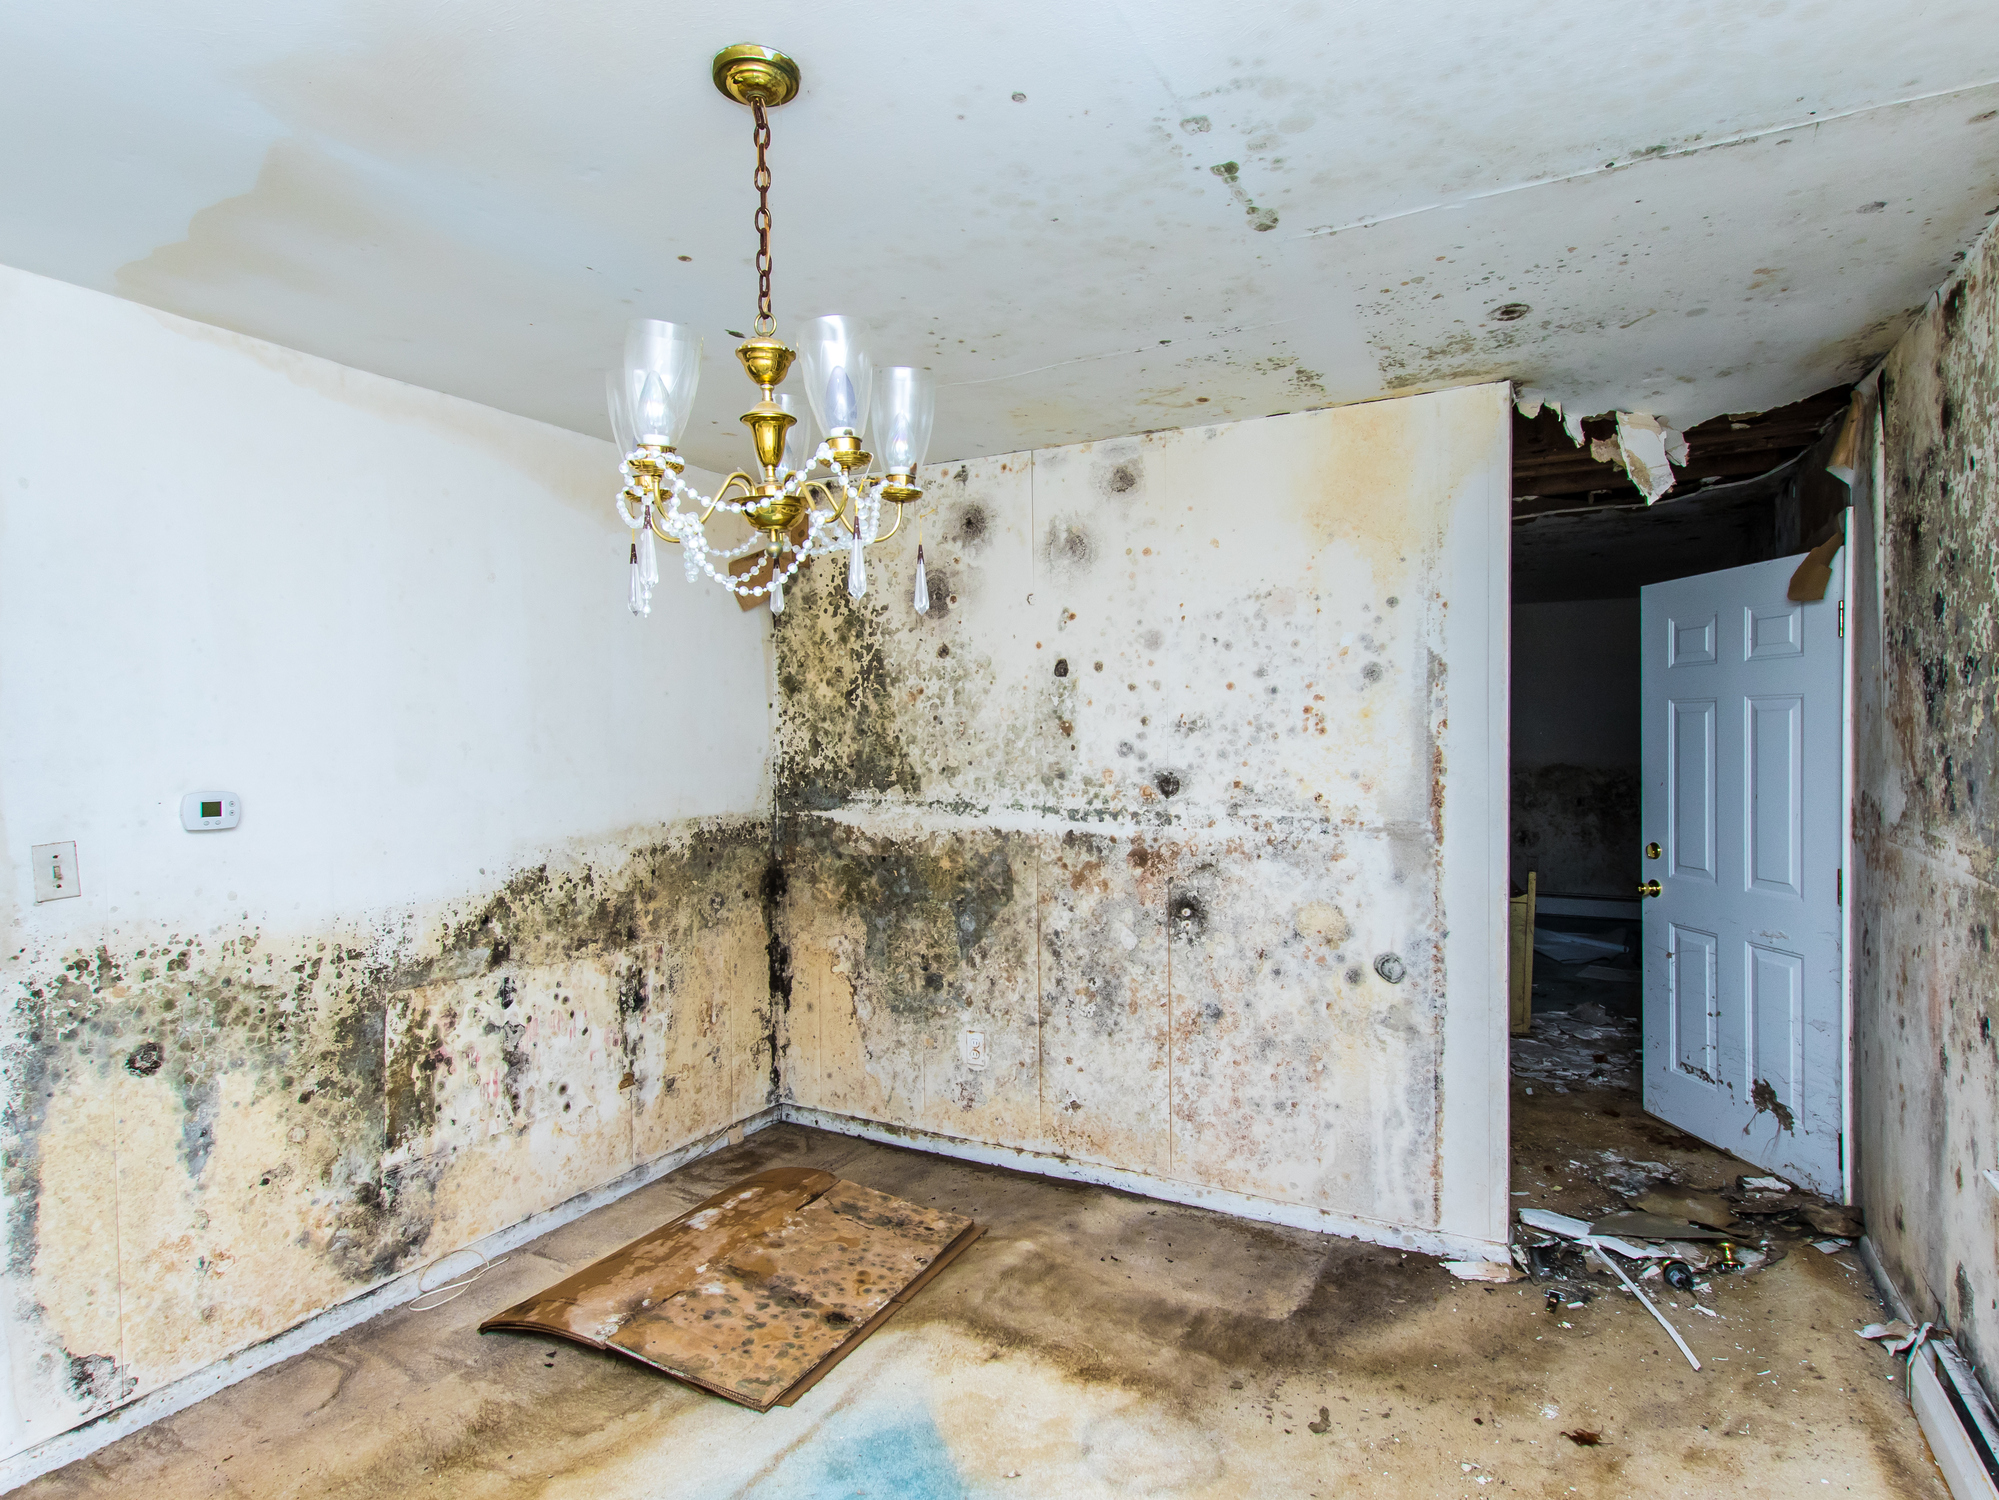 Mold Growth on walls of home - Mold Removal